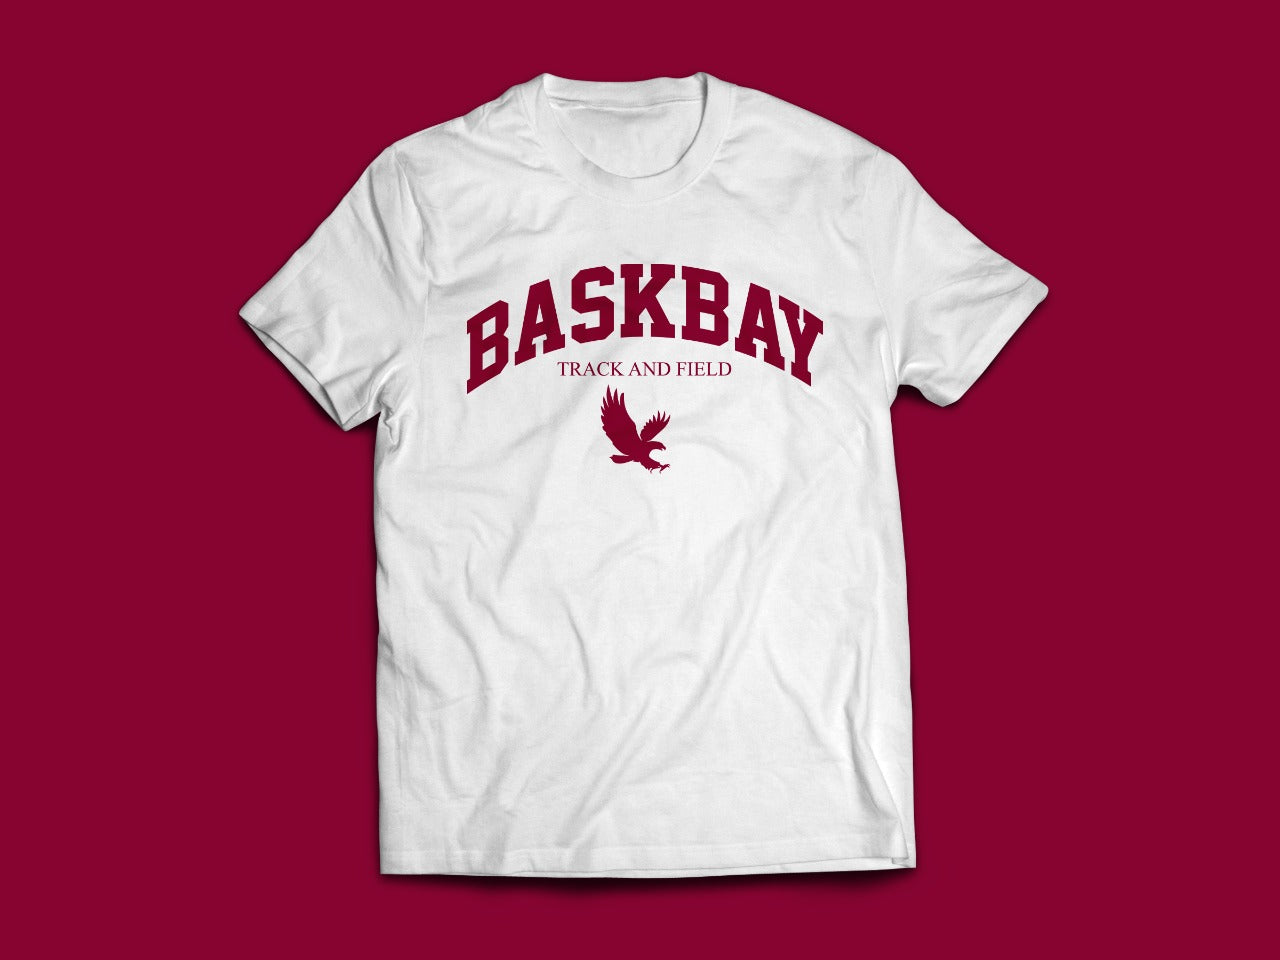 Baskbay Track and Field T-Shirt - Red on White